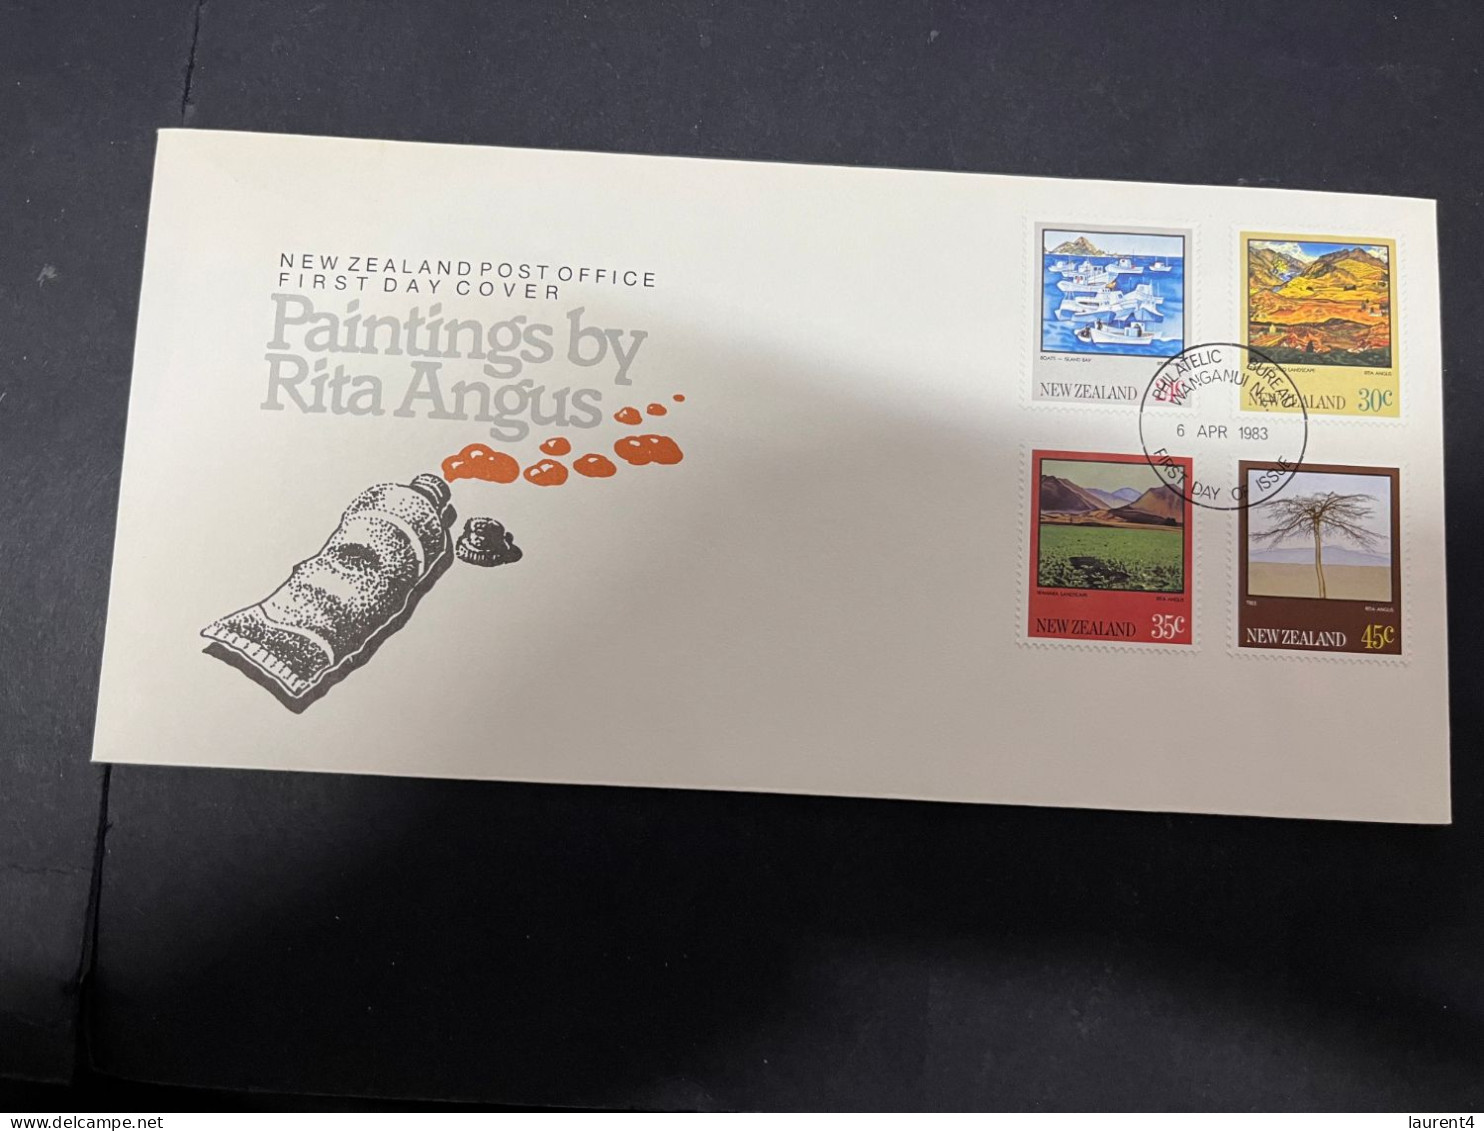 1-5-2024 (3 Z 32) FDC New Zealand - 1983 - Rita Angus Paintings - FDC